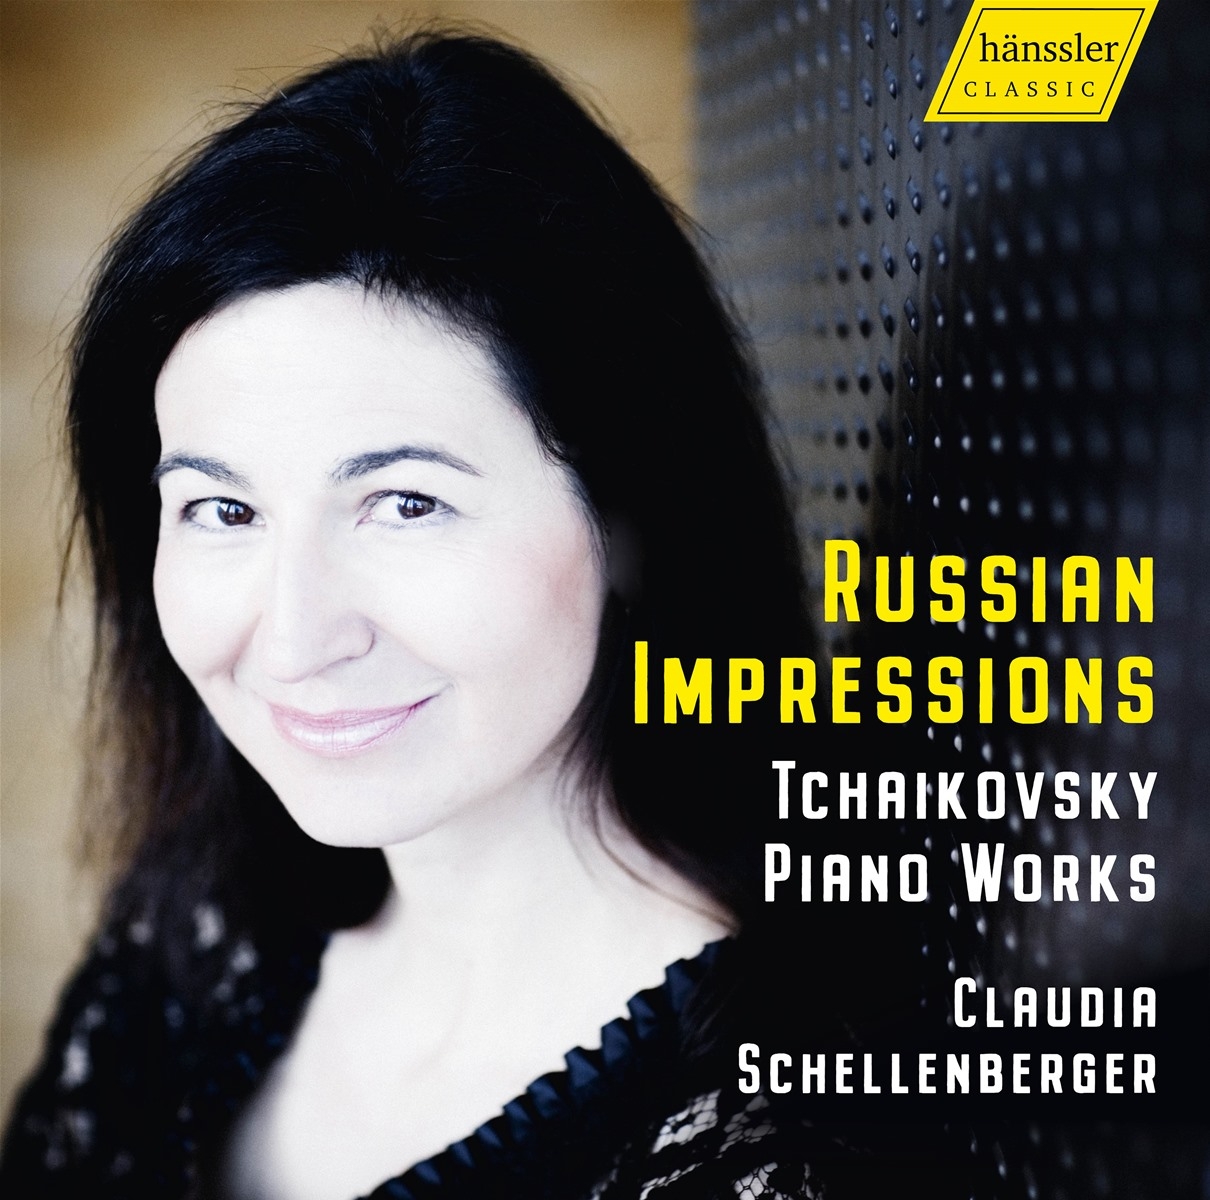 Russian Impressions - piano works